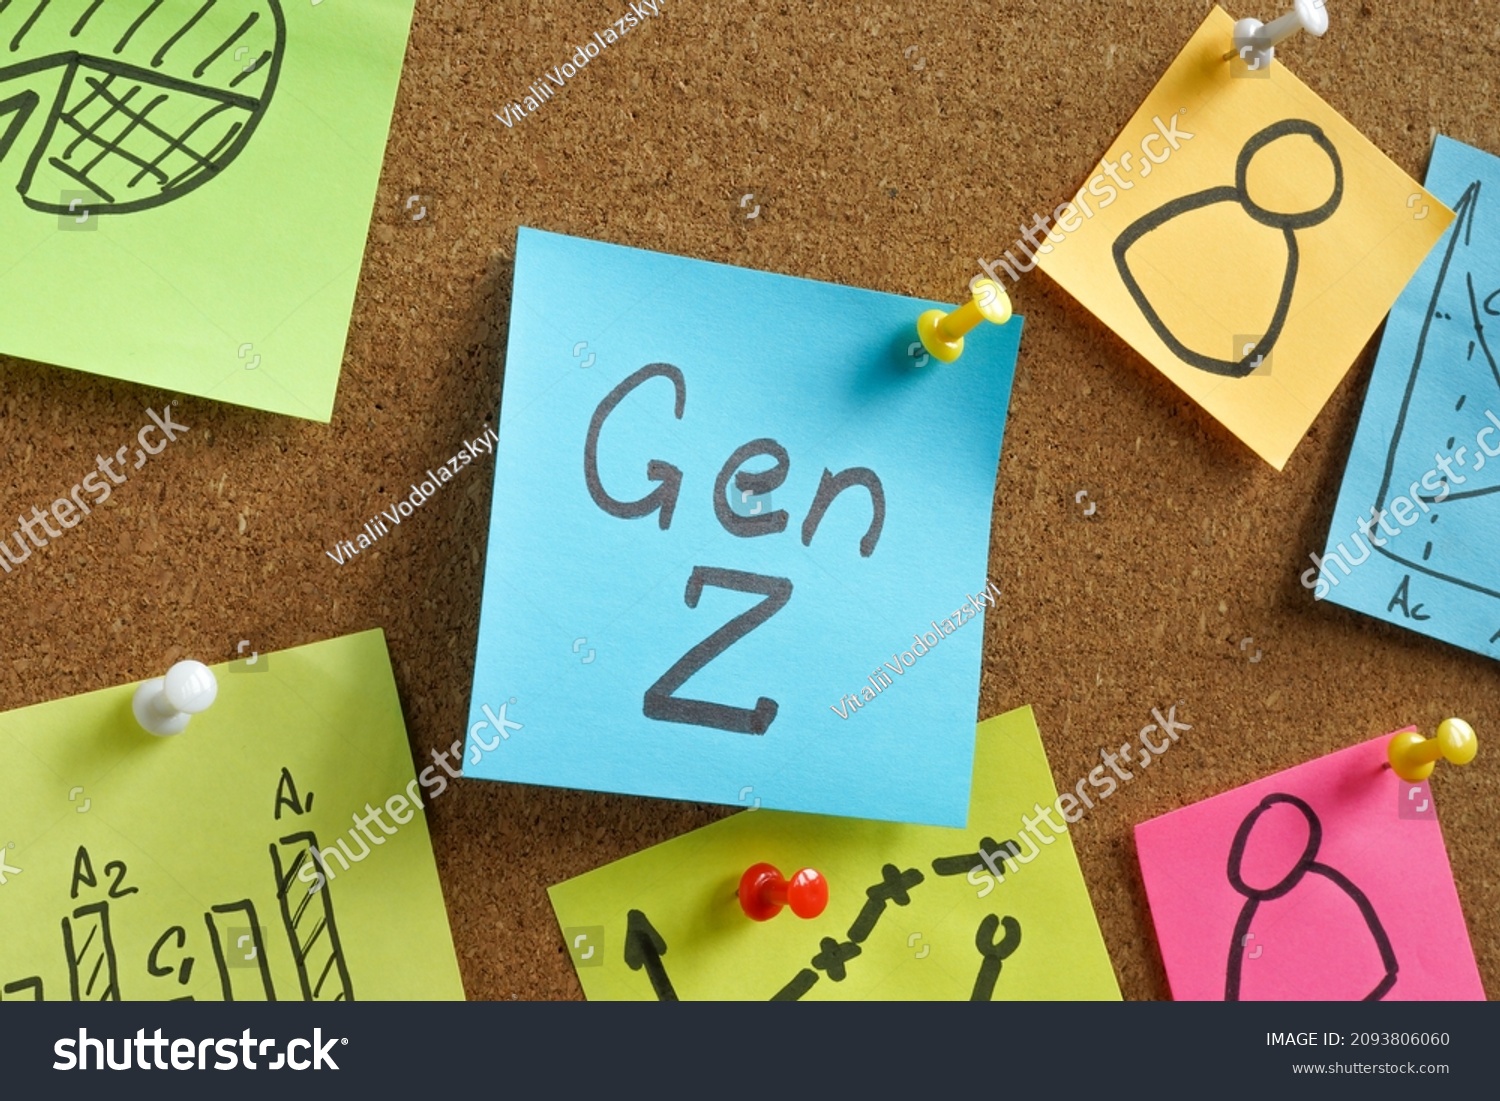 Generation or gen Z on the sticker and marketing data. #2093806060